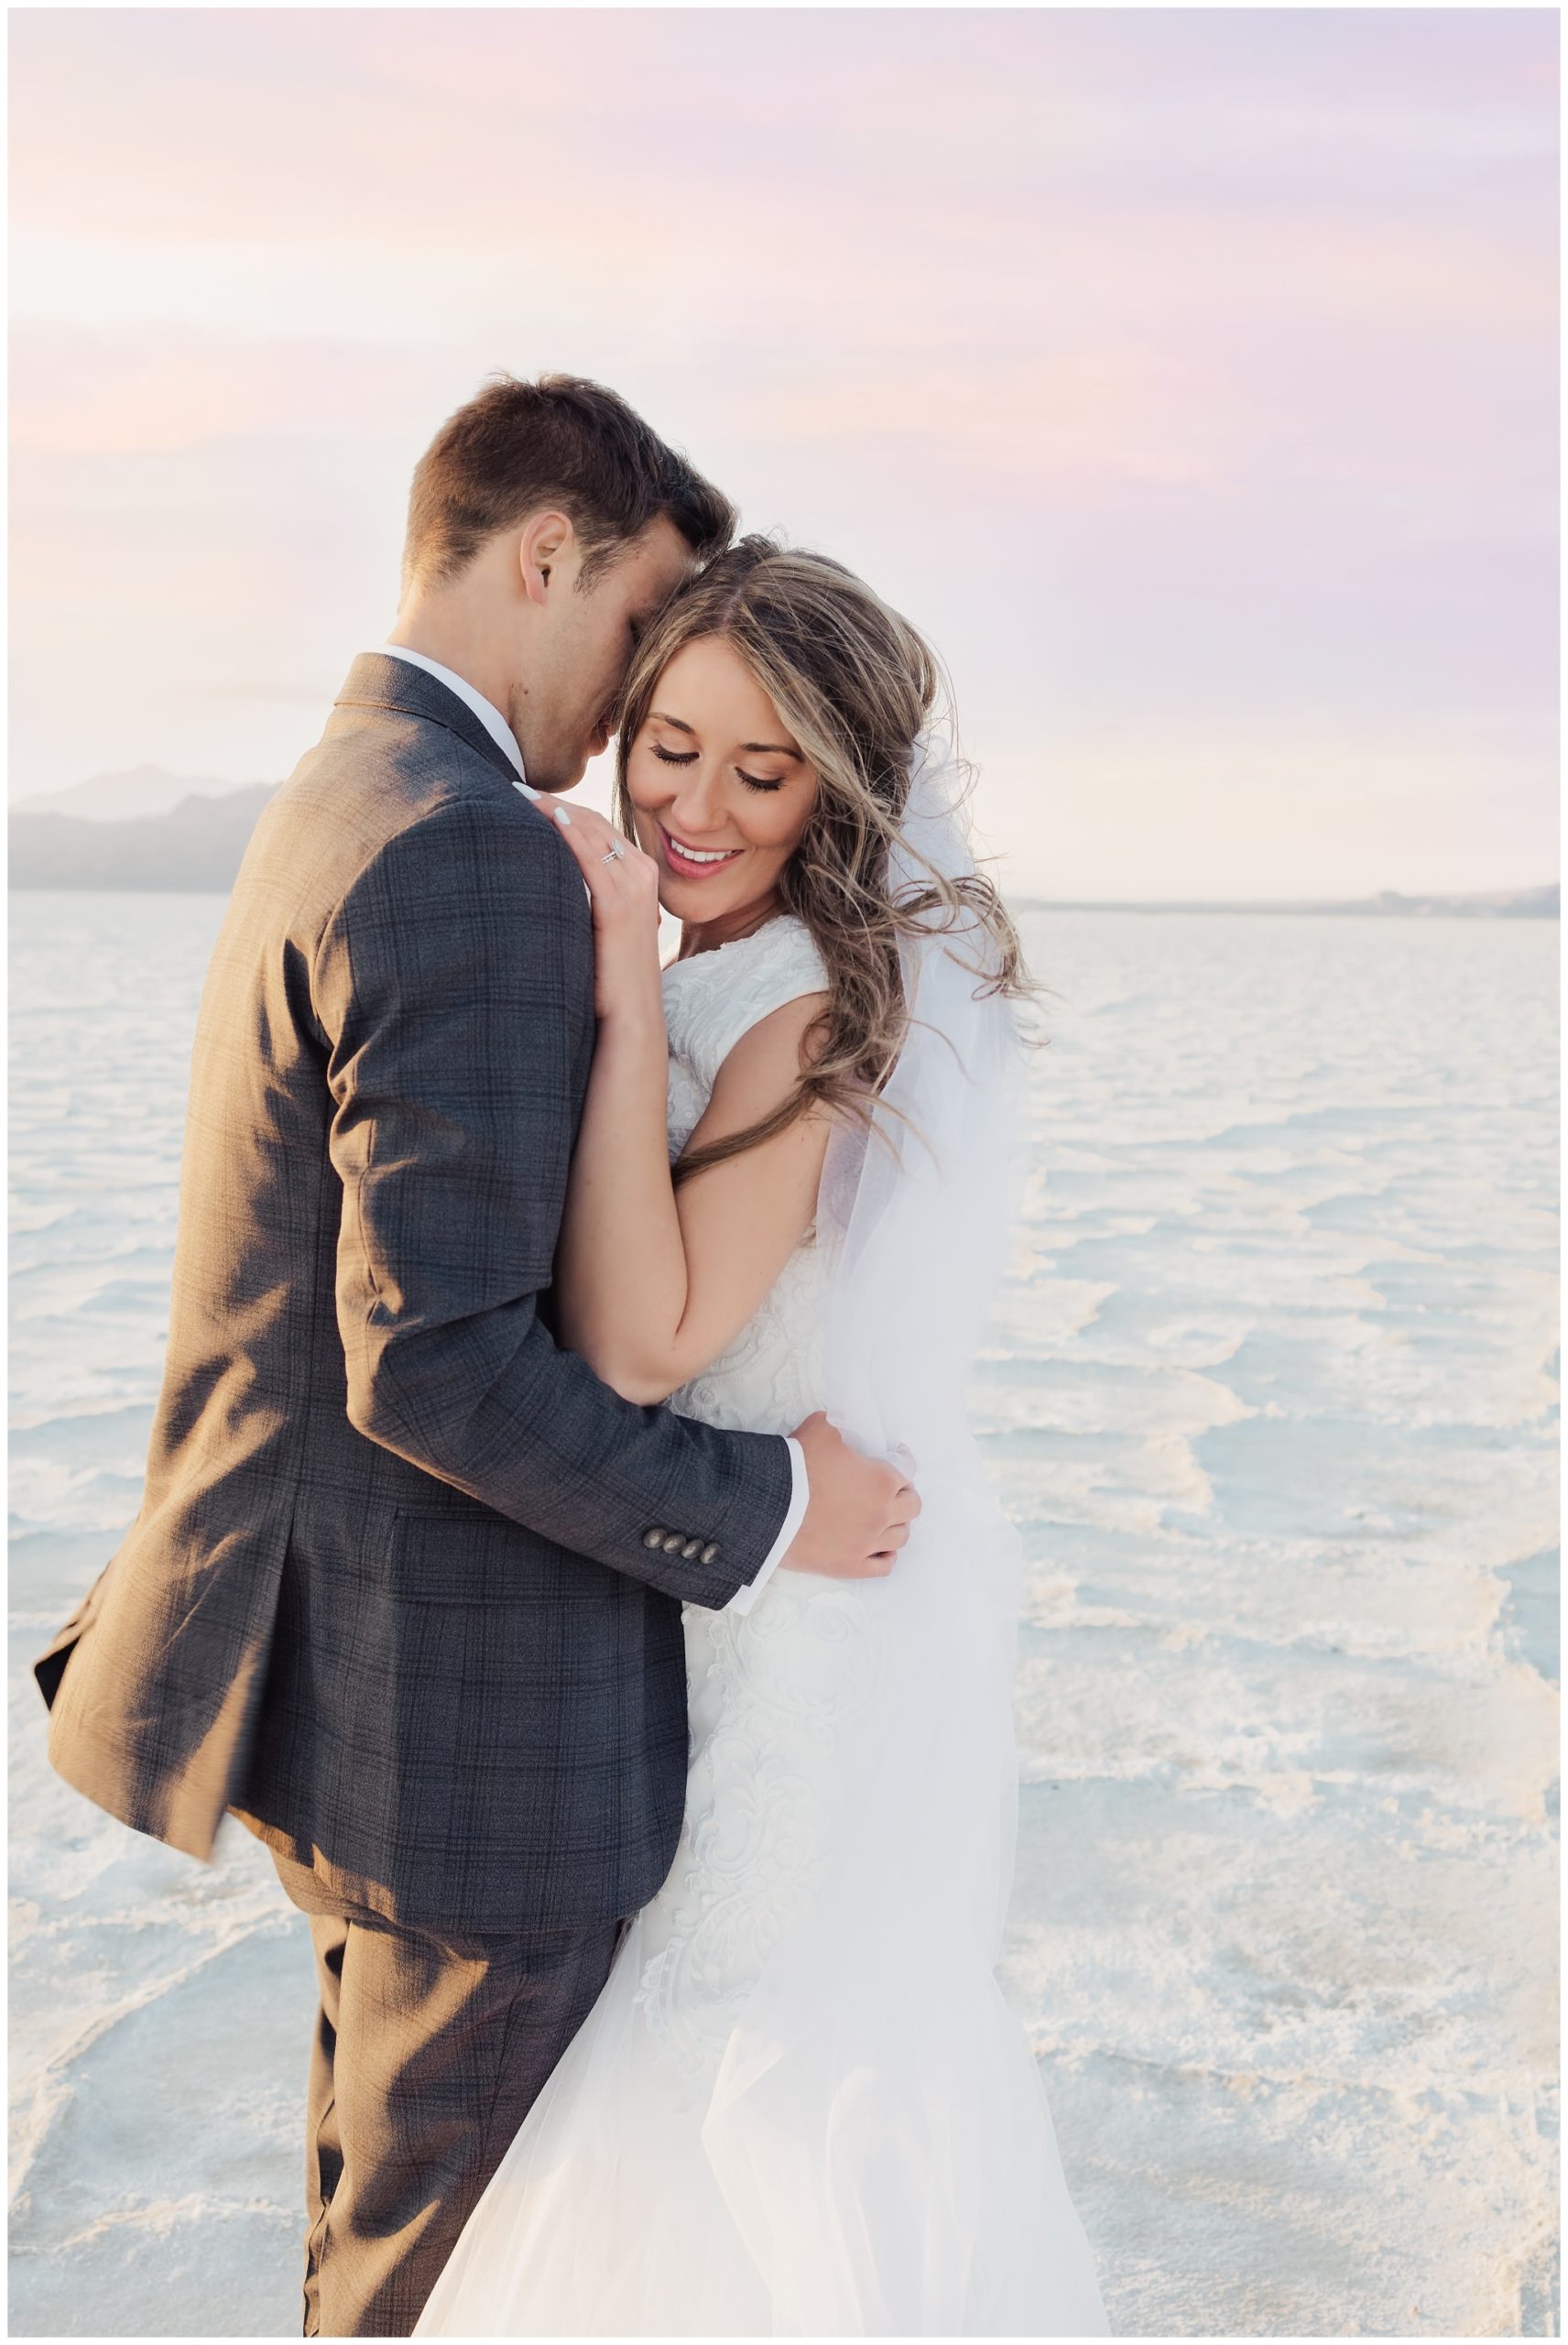 Bride and groom embracing at the Utah Bonneville Salt Flats in the summer